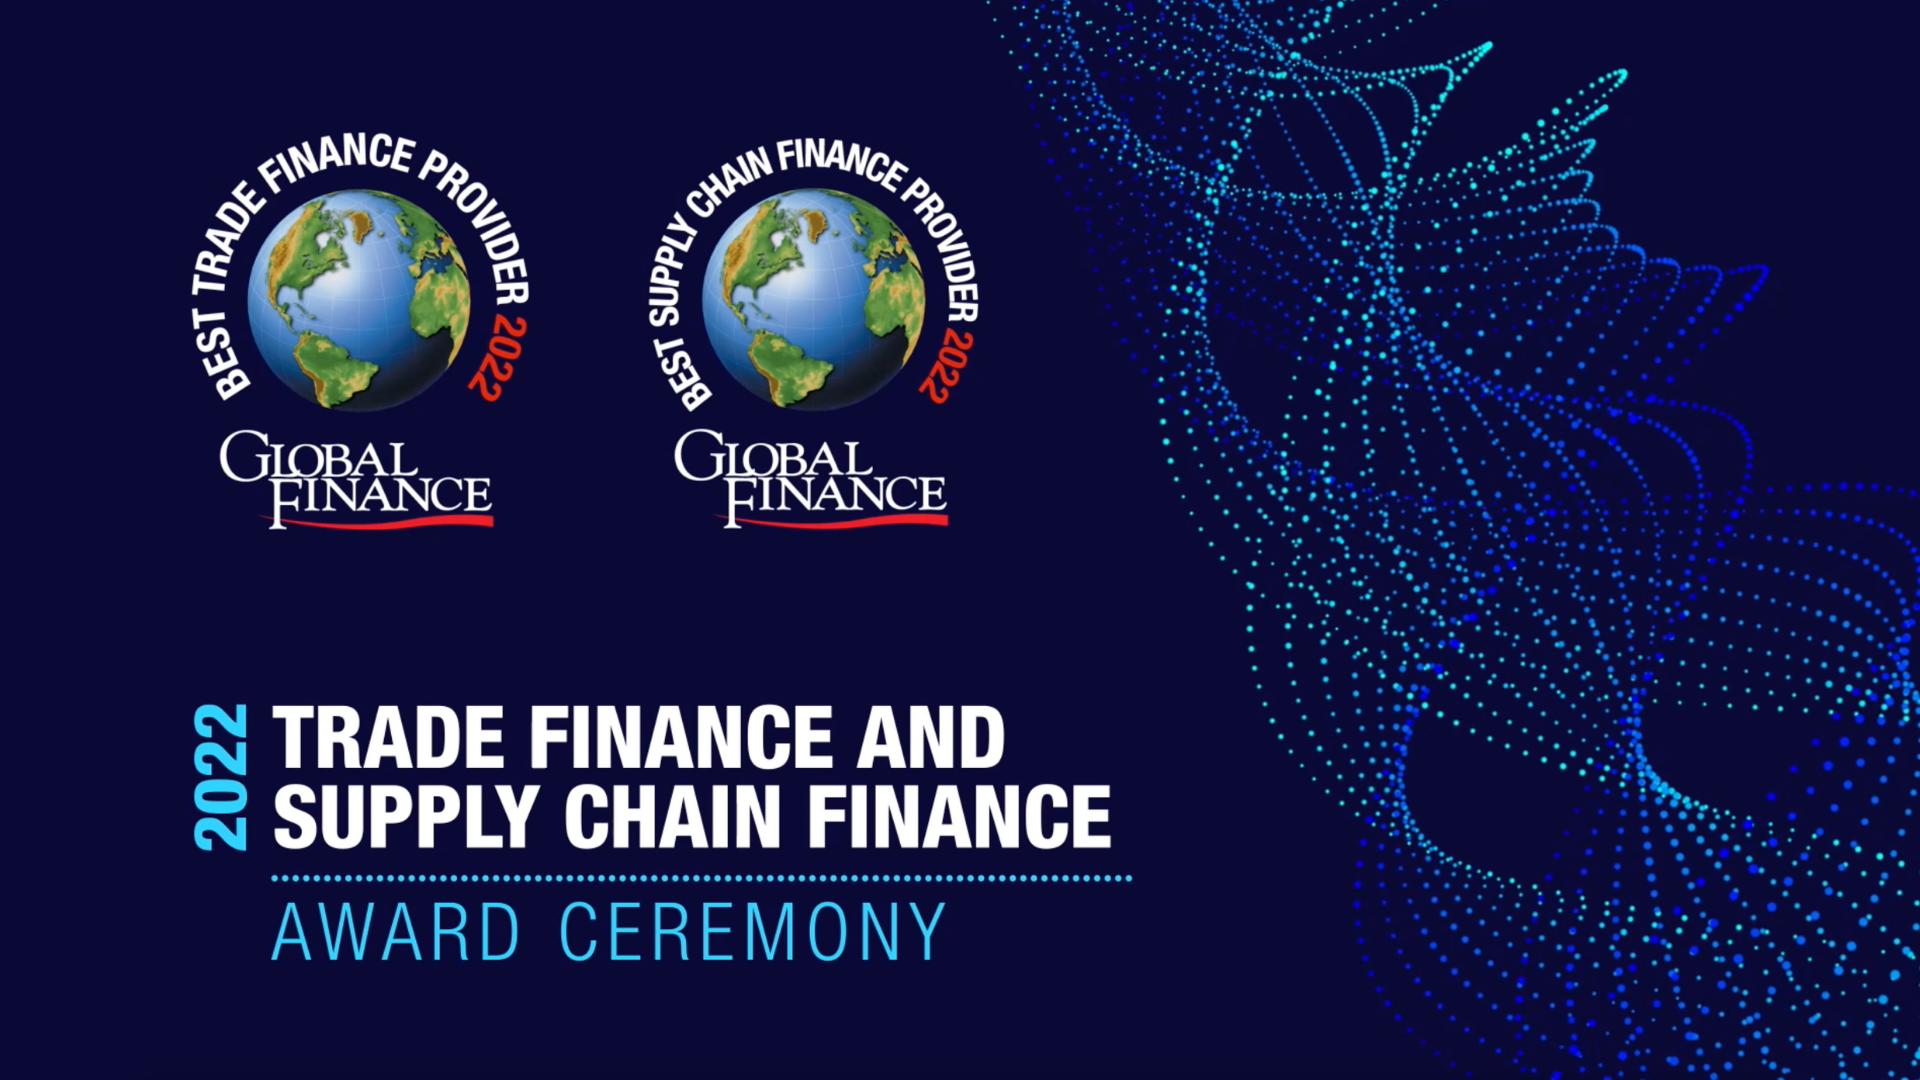 Global Finance Awards 2022: ASYX as World's Best Provider of Sustainable SCF Solutions